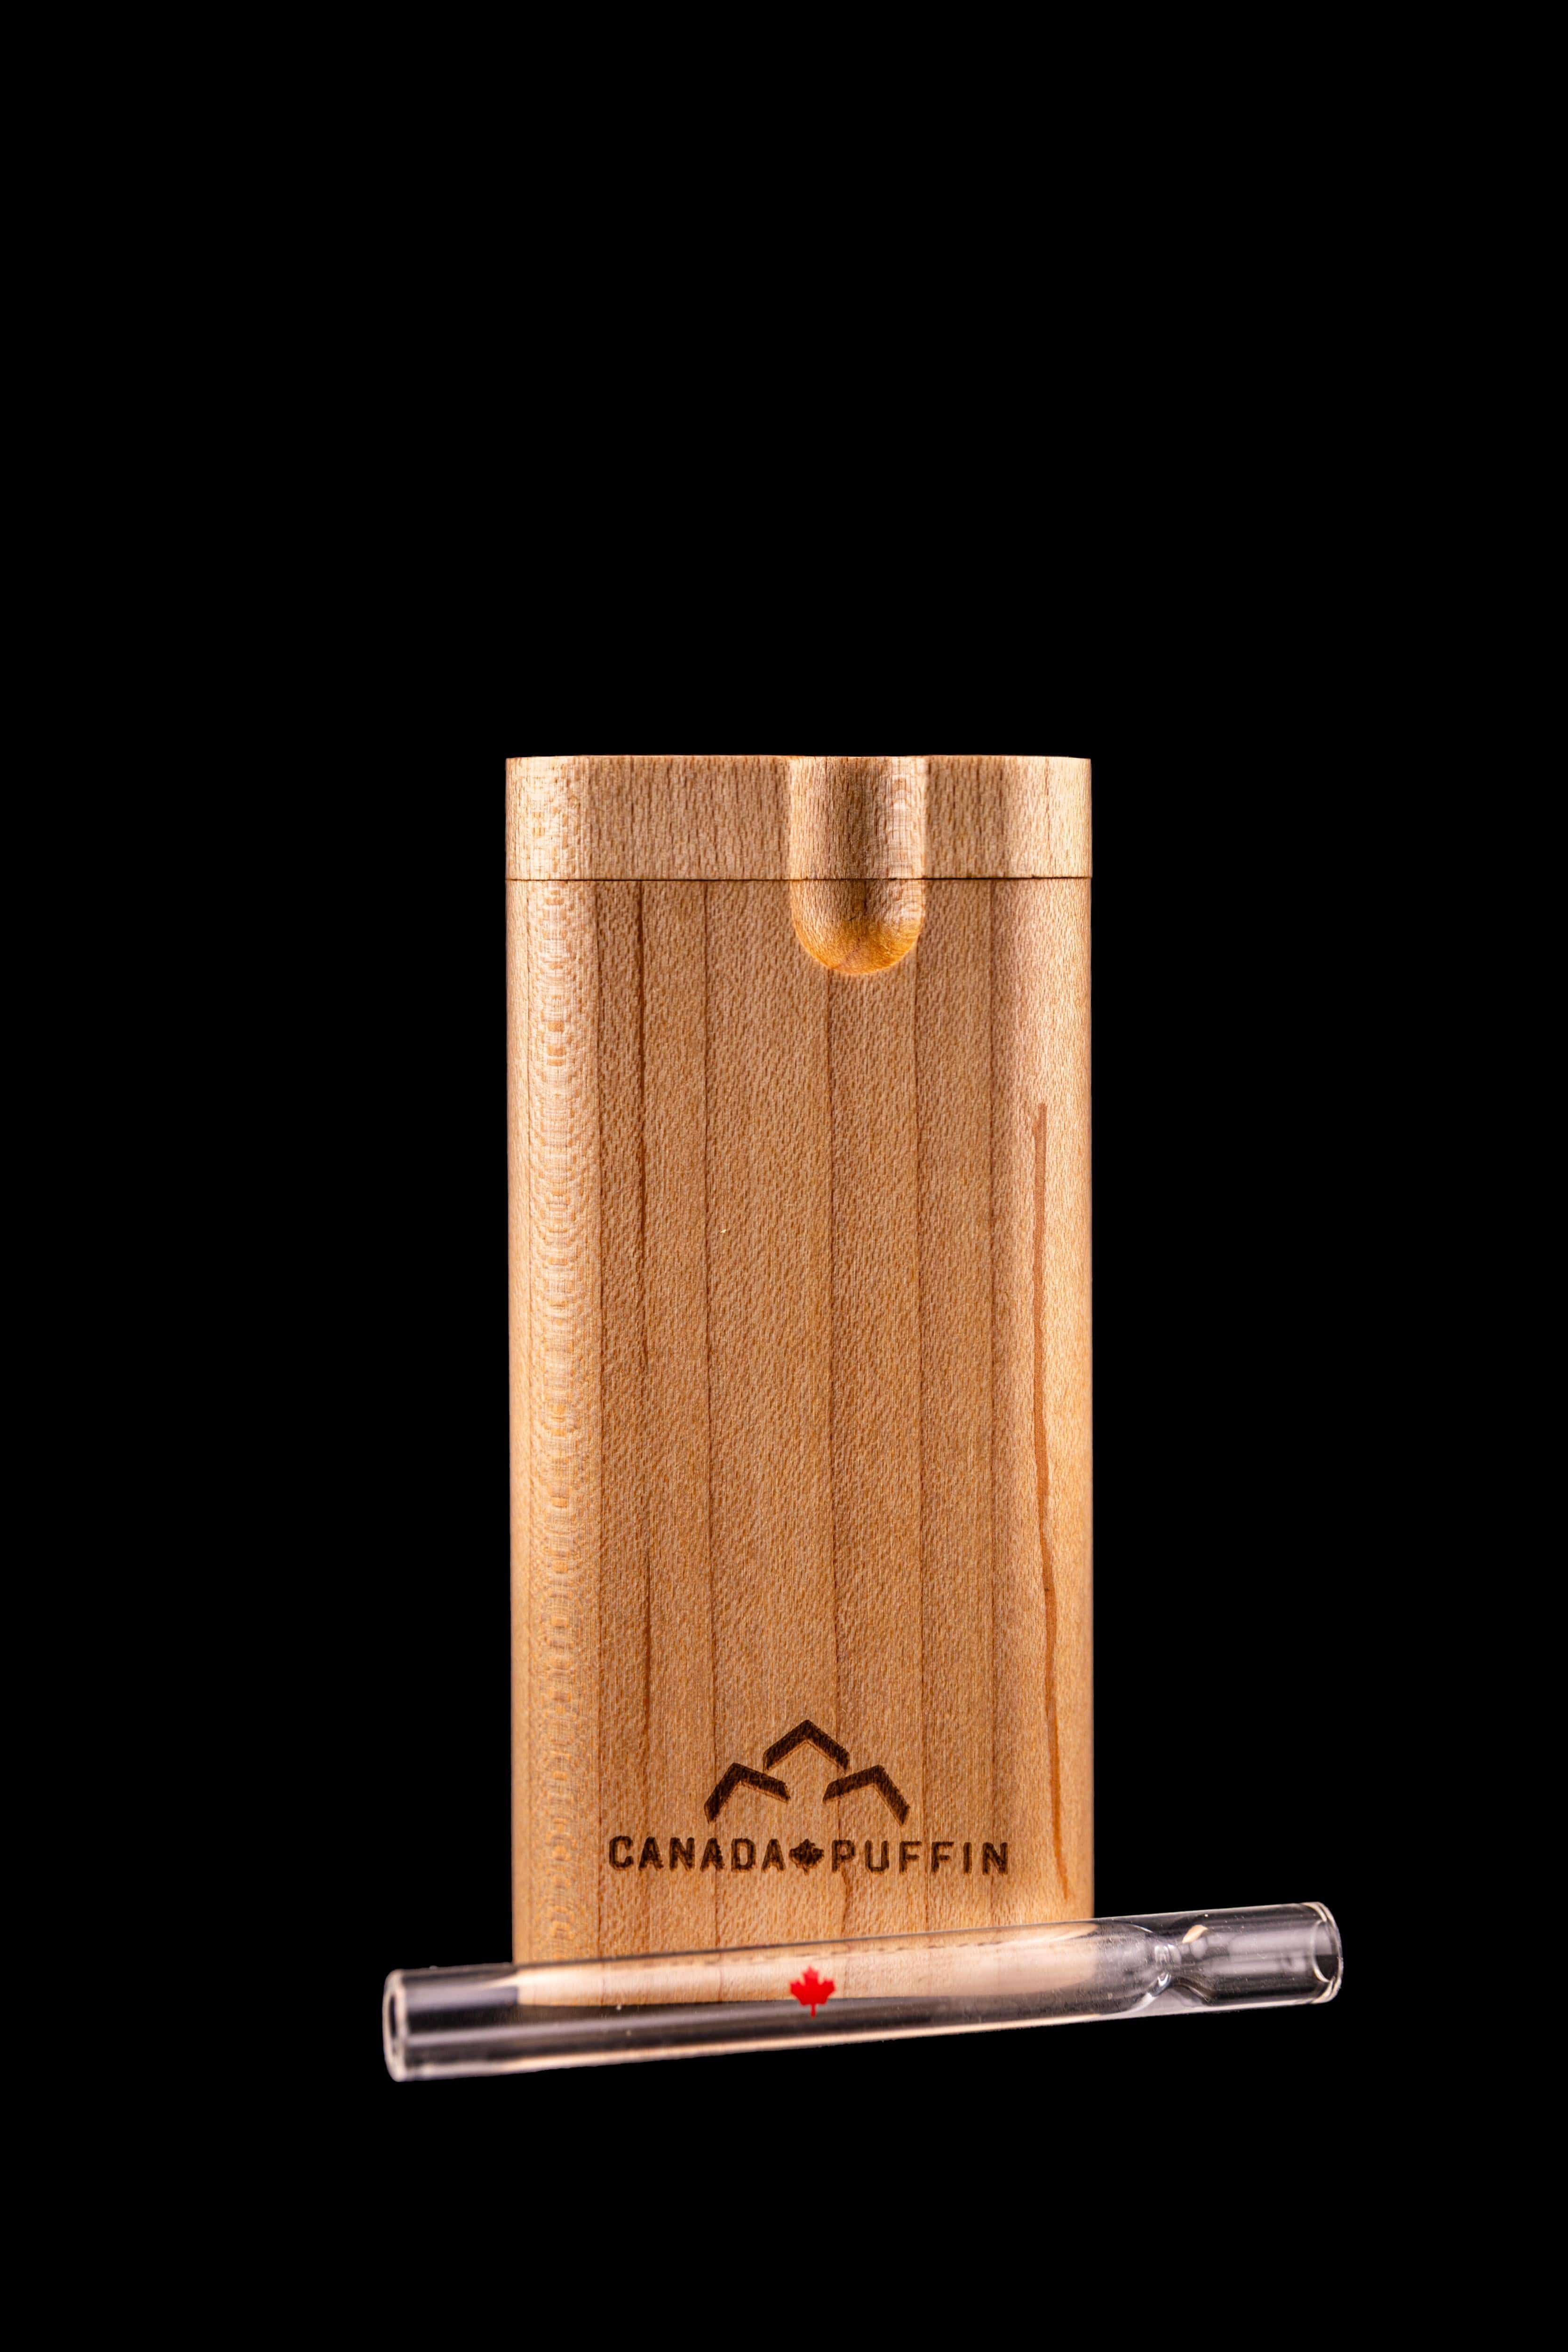 Canada Puffin Dugout Banff Dugout and One Hitter